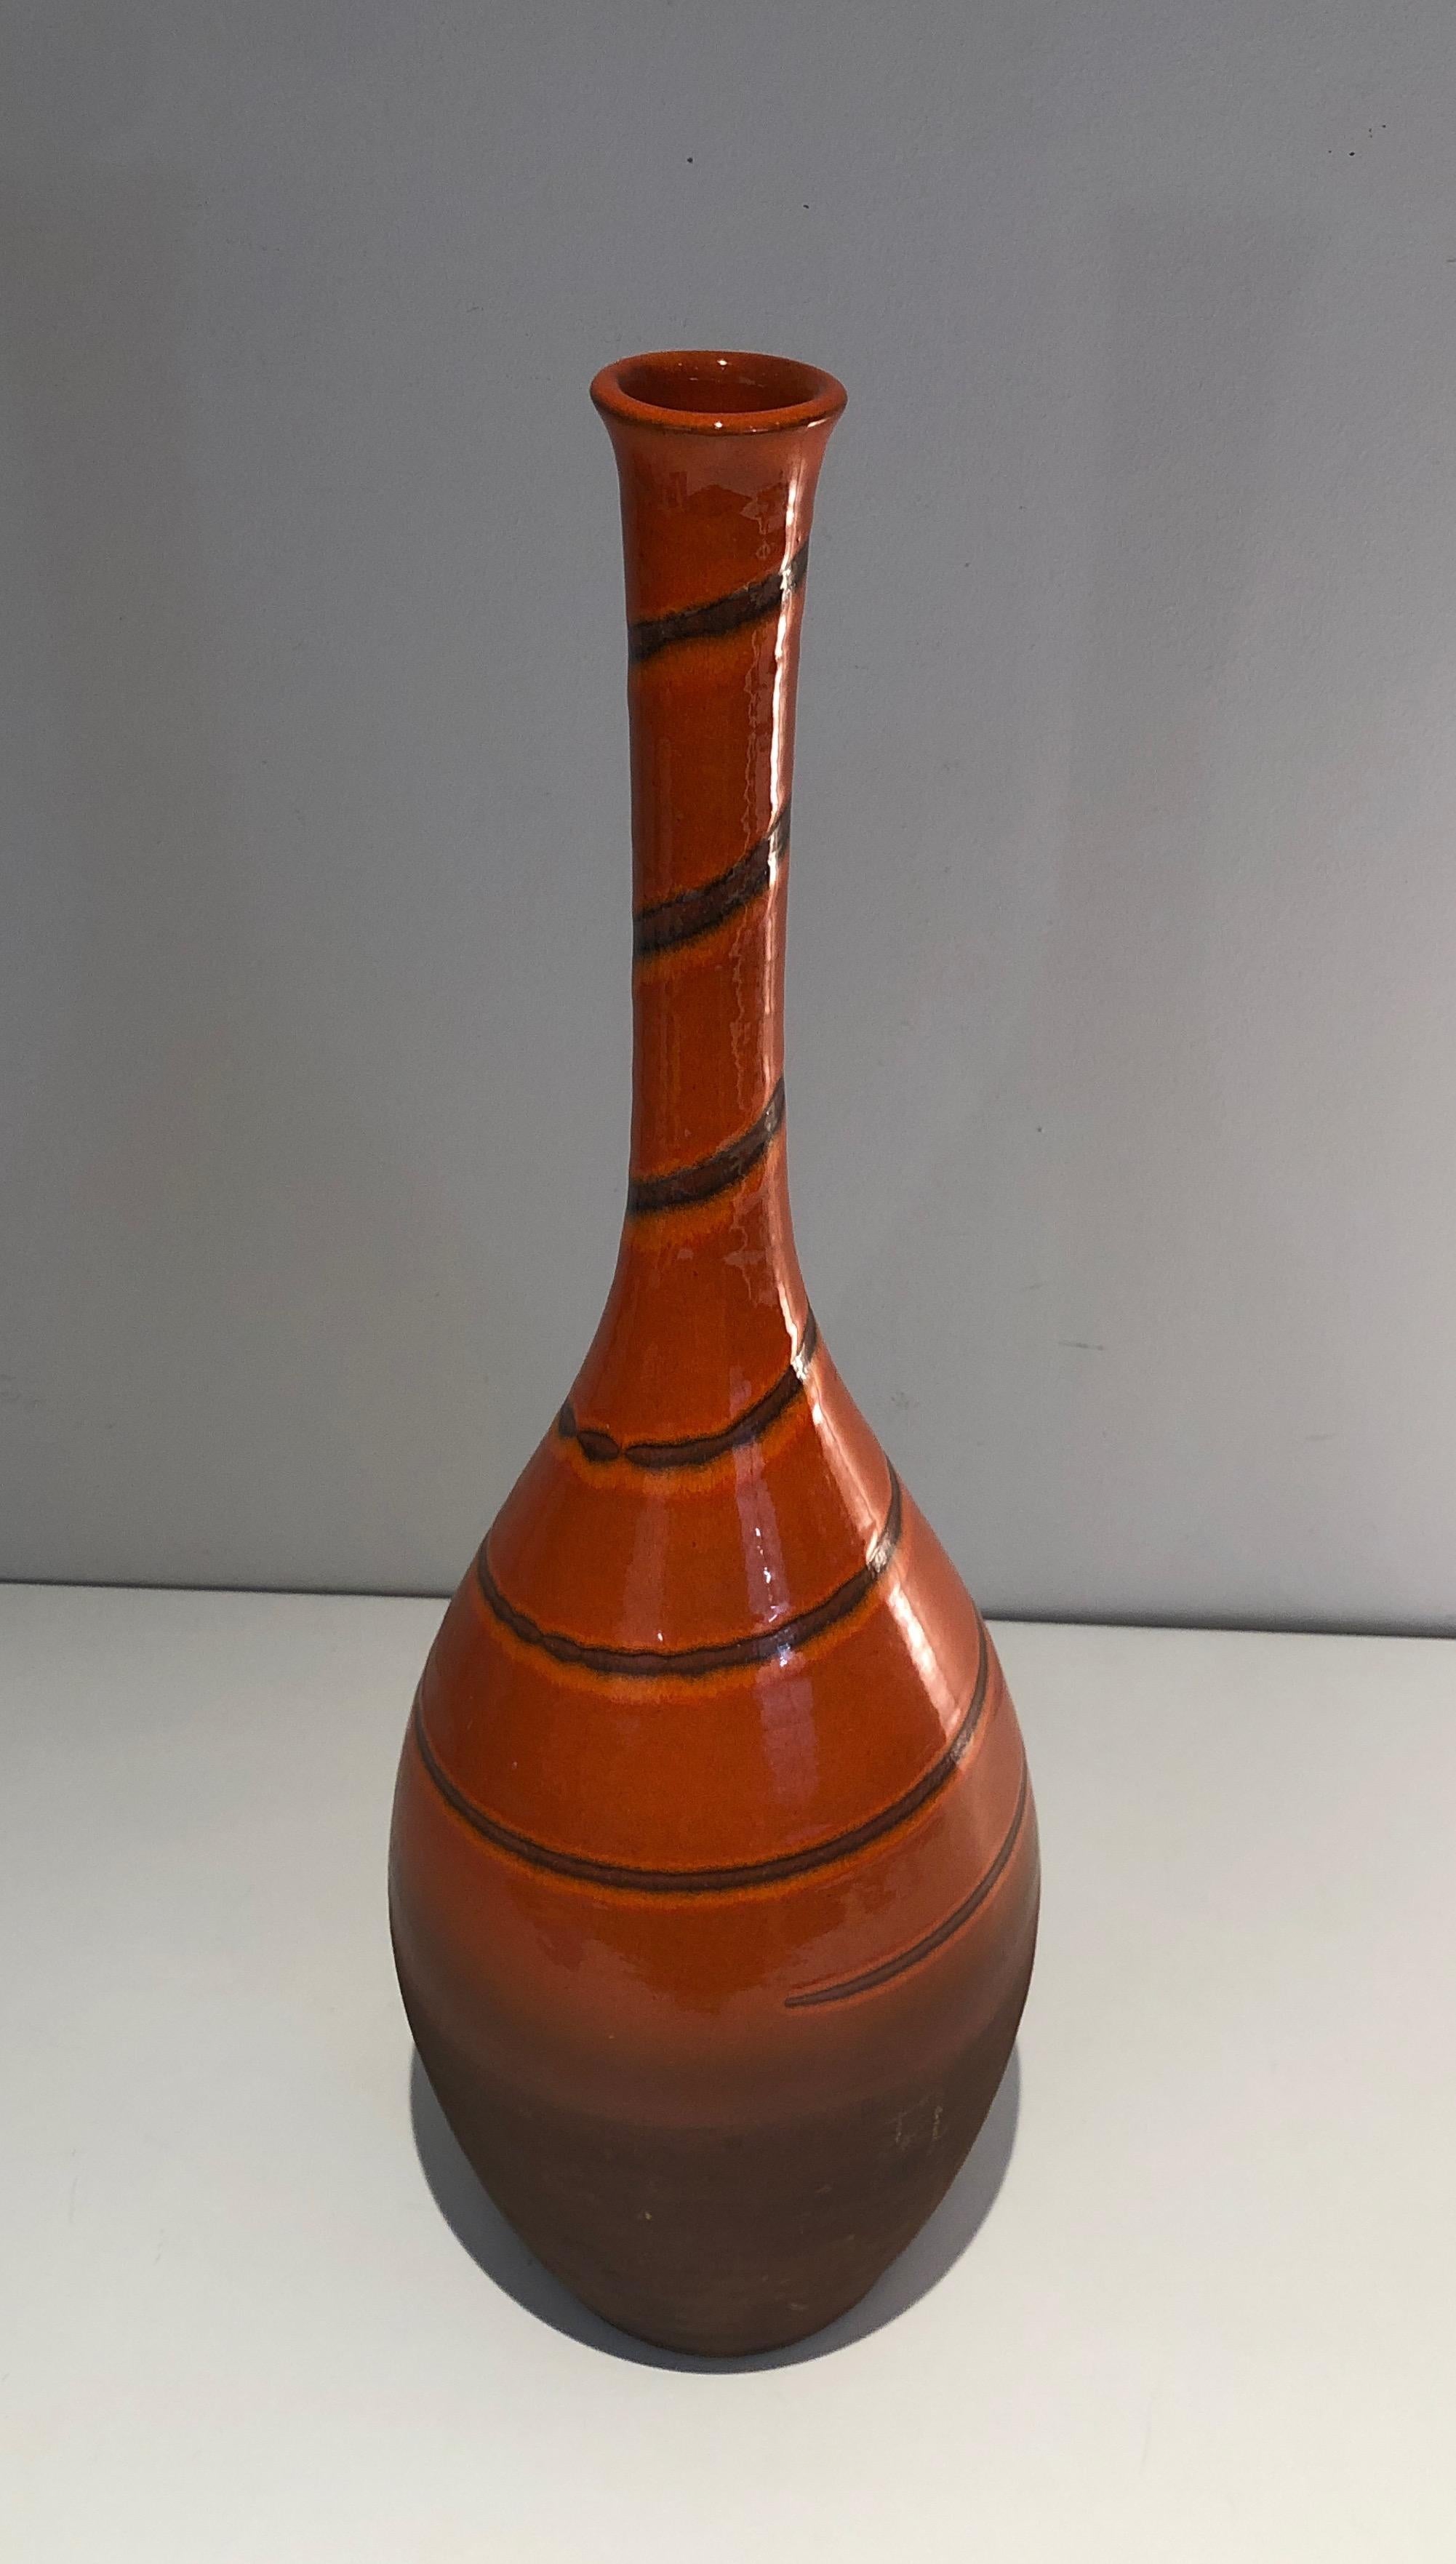 Mid-Century Modern Tall Ceramic Vase in the Red-Orange Tones, French Work, Circa 1950 For Sale